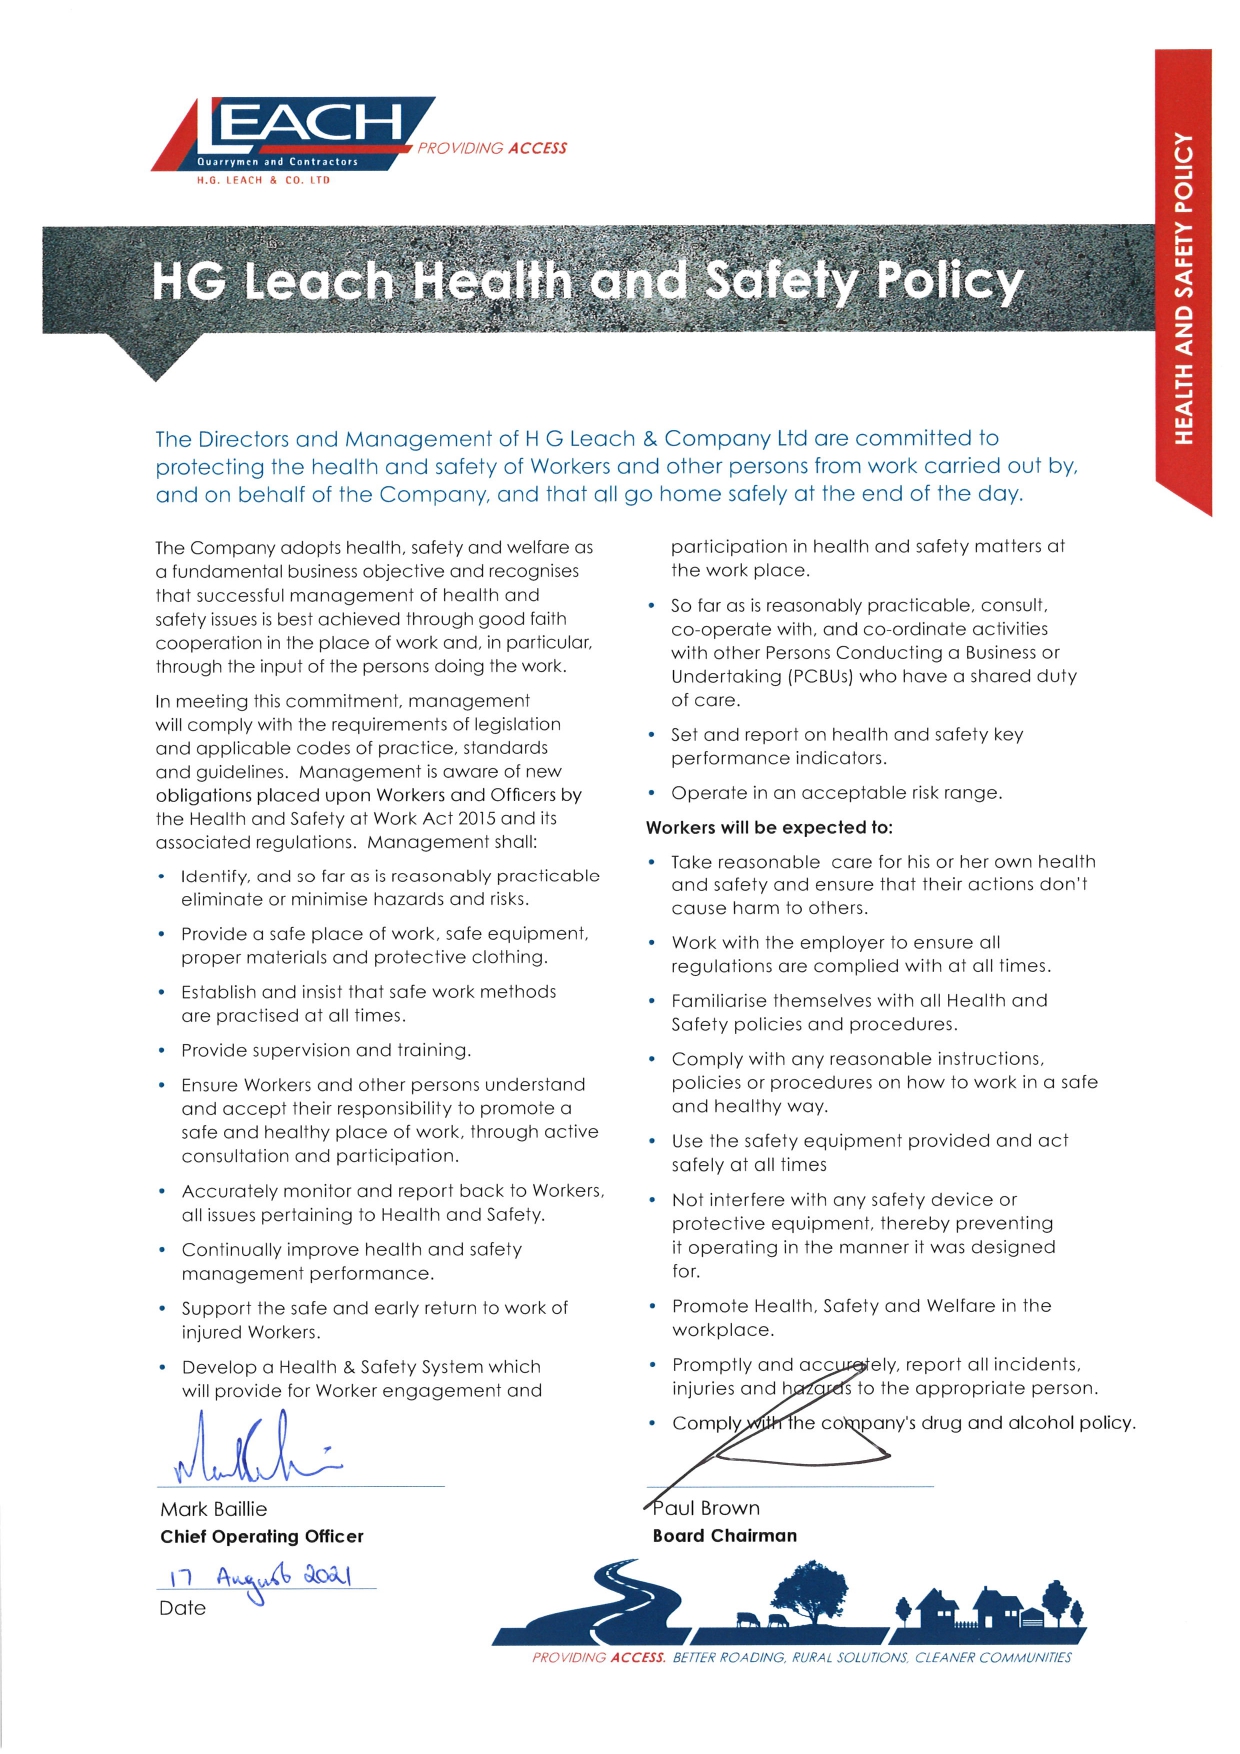 HG Leach | Health and Safety policy 2021